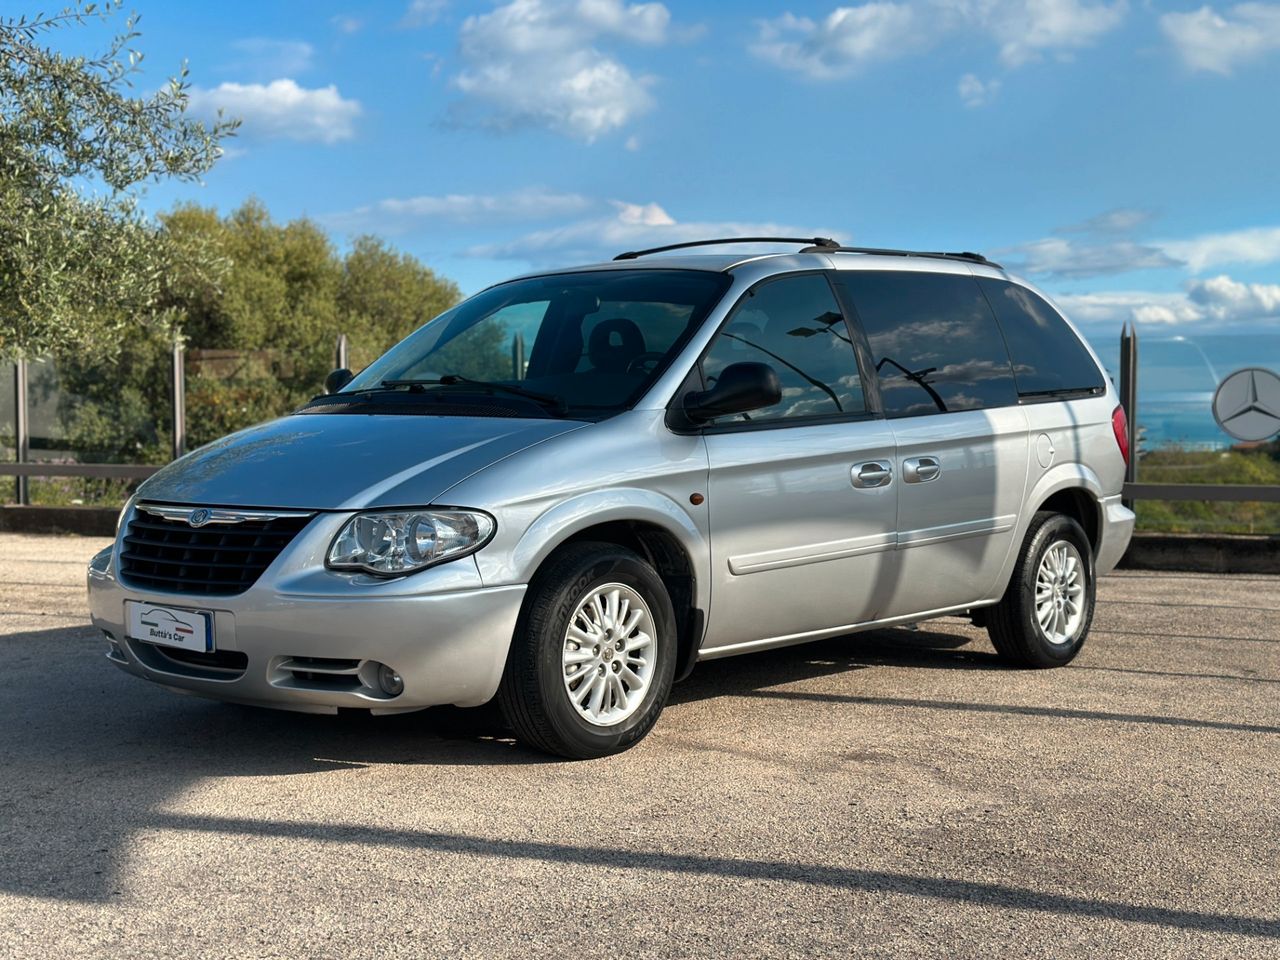 Chrysler Voyager 2.8 CRD cat LX Auto